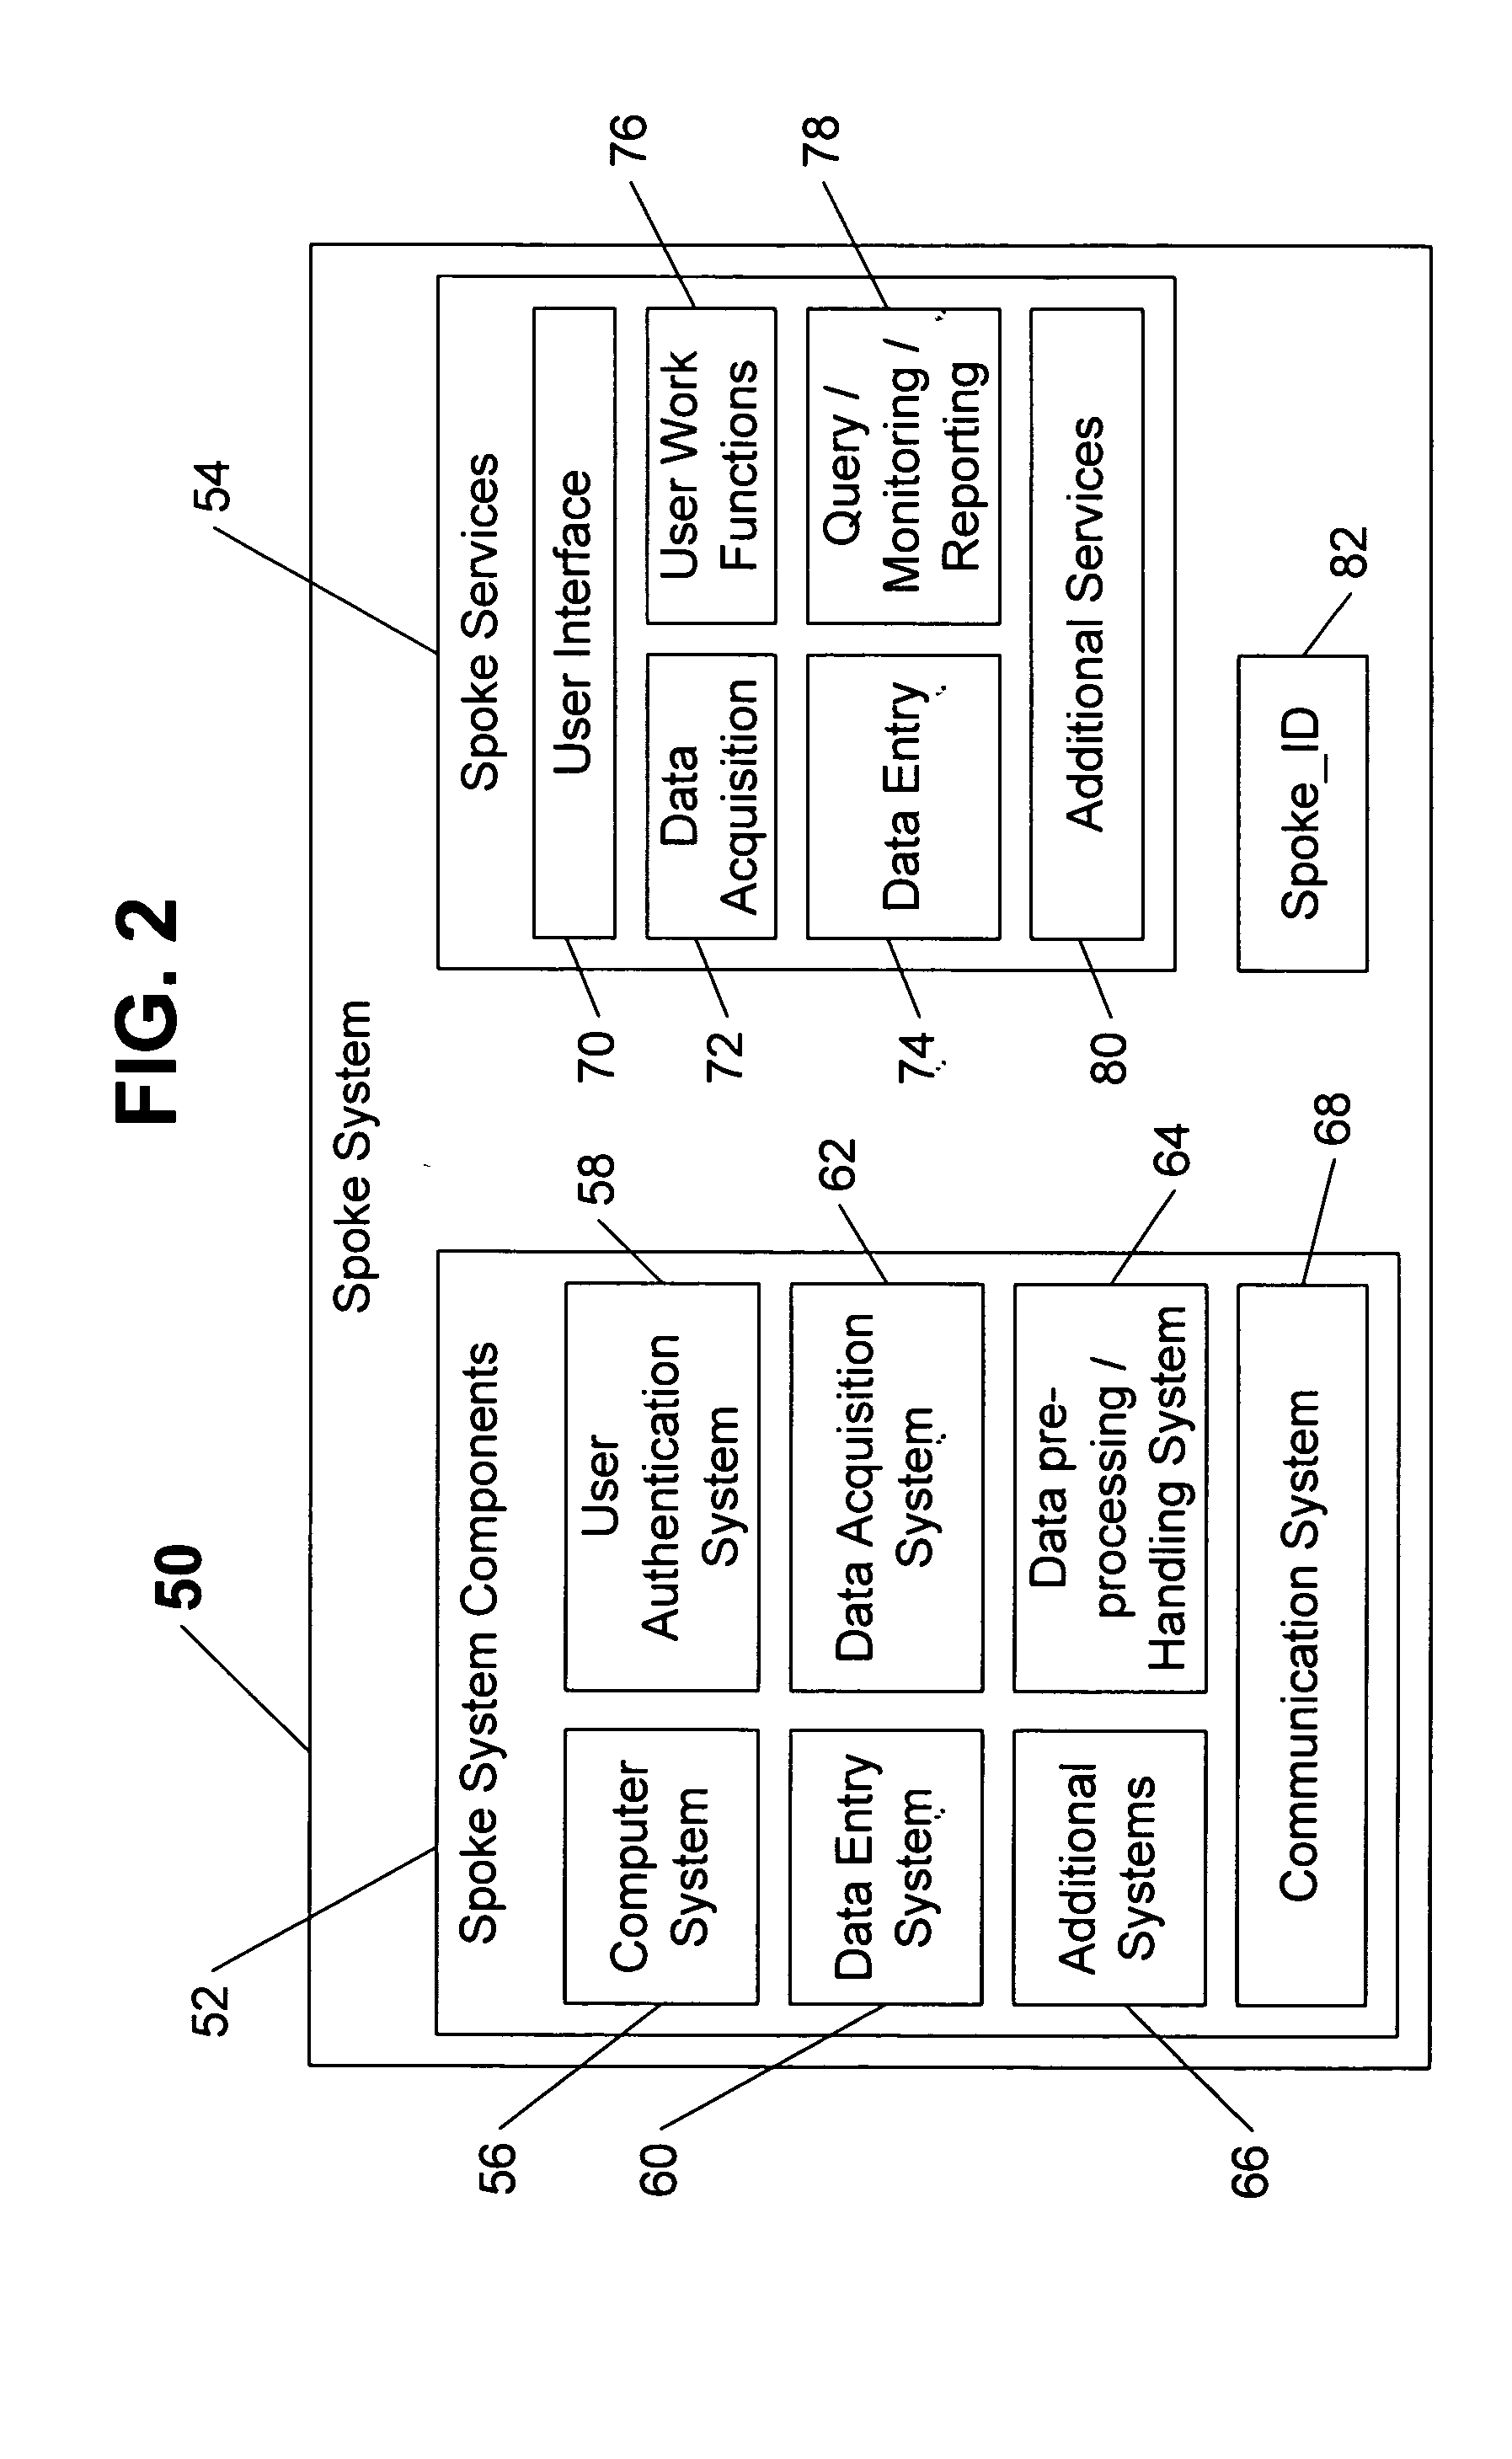 System and method for dynamic distributed data processing utilizing hub and spoke architecture